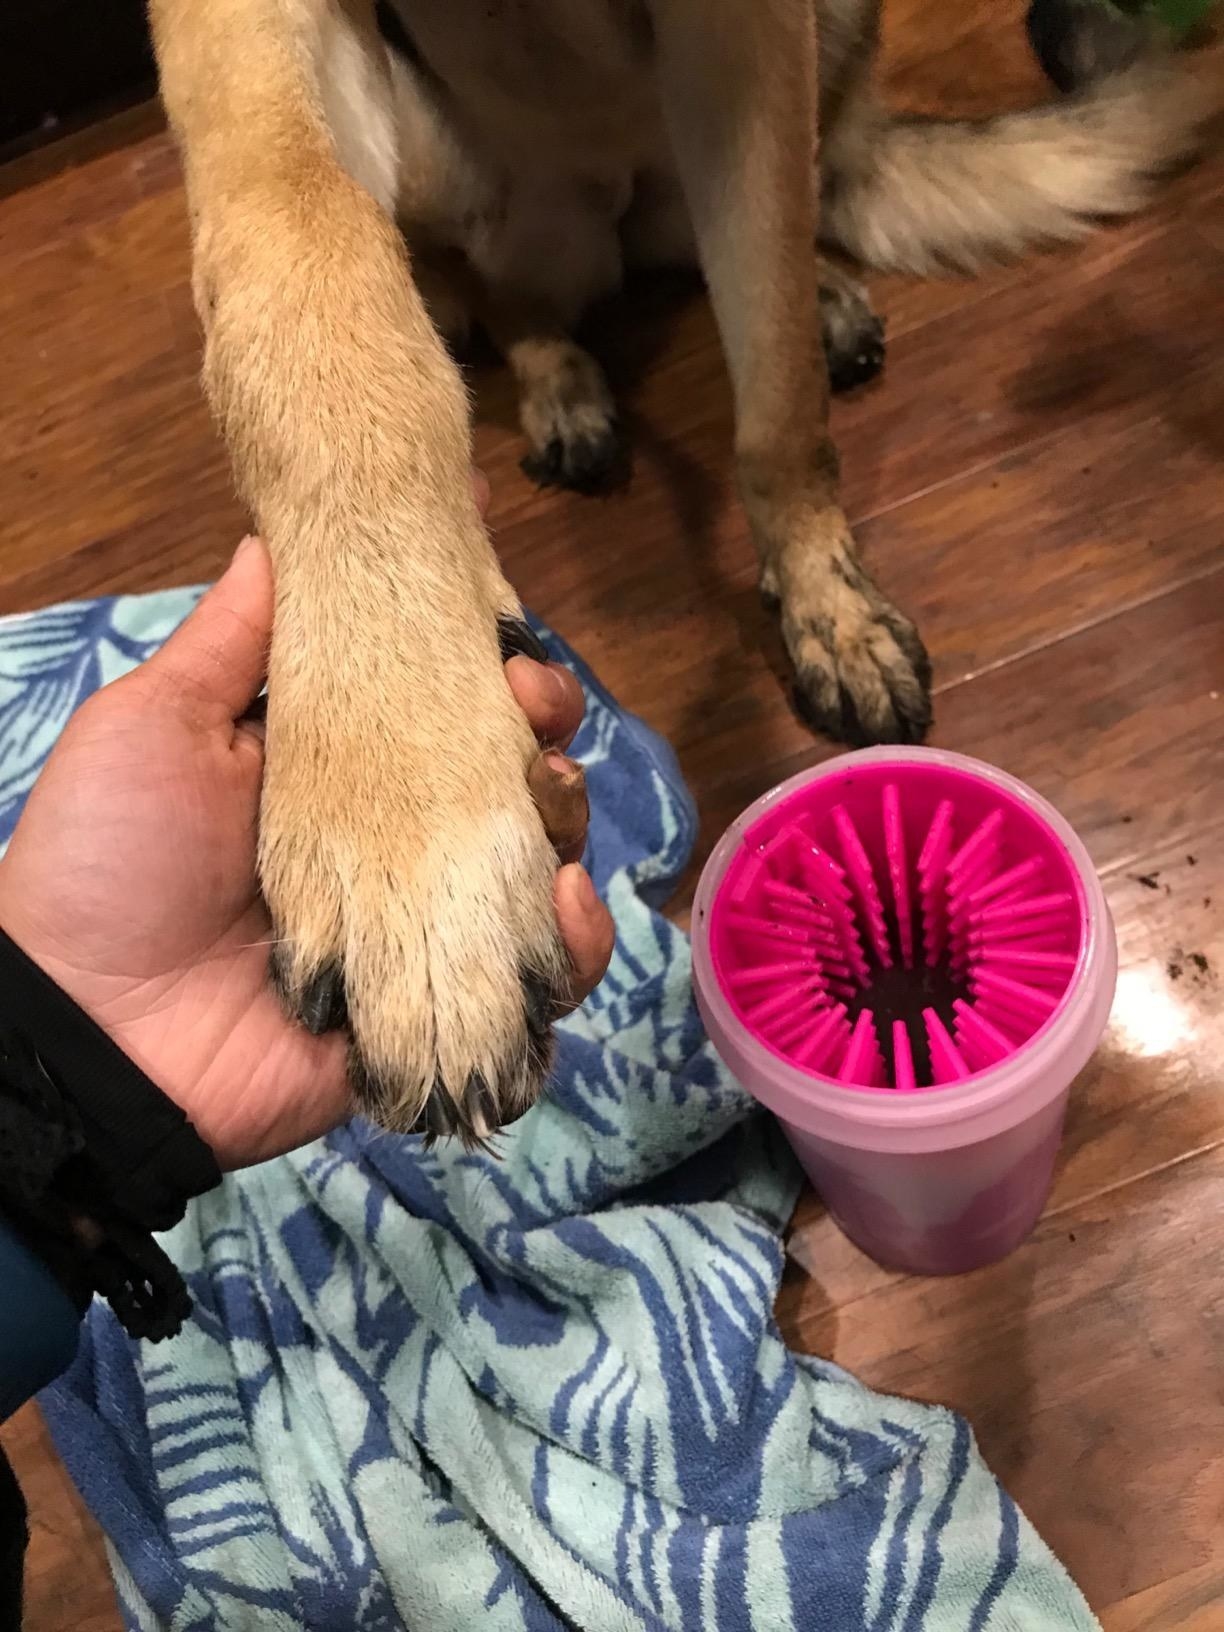 A reviewer&#x27;s photo of their German shepherd using the large pink cleaner